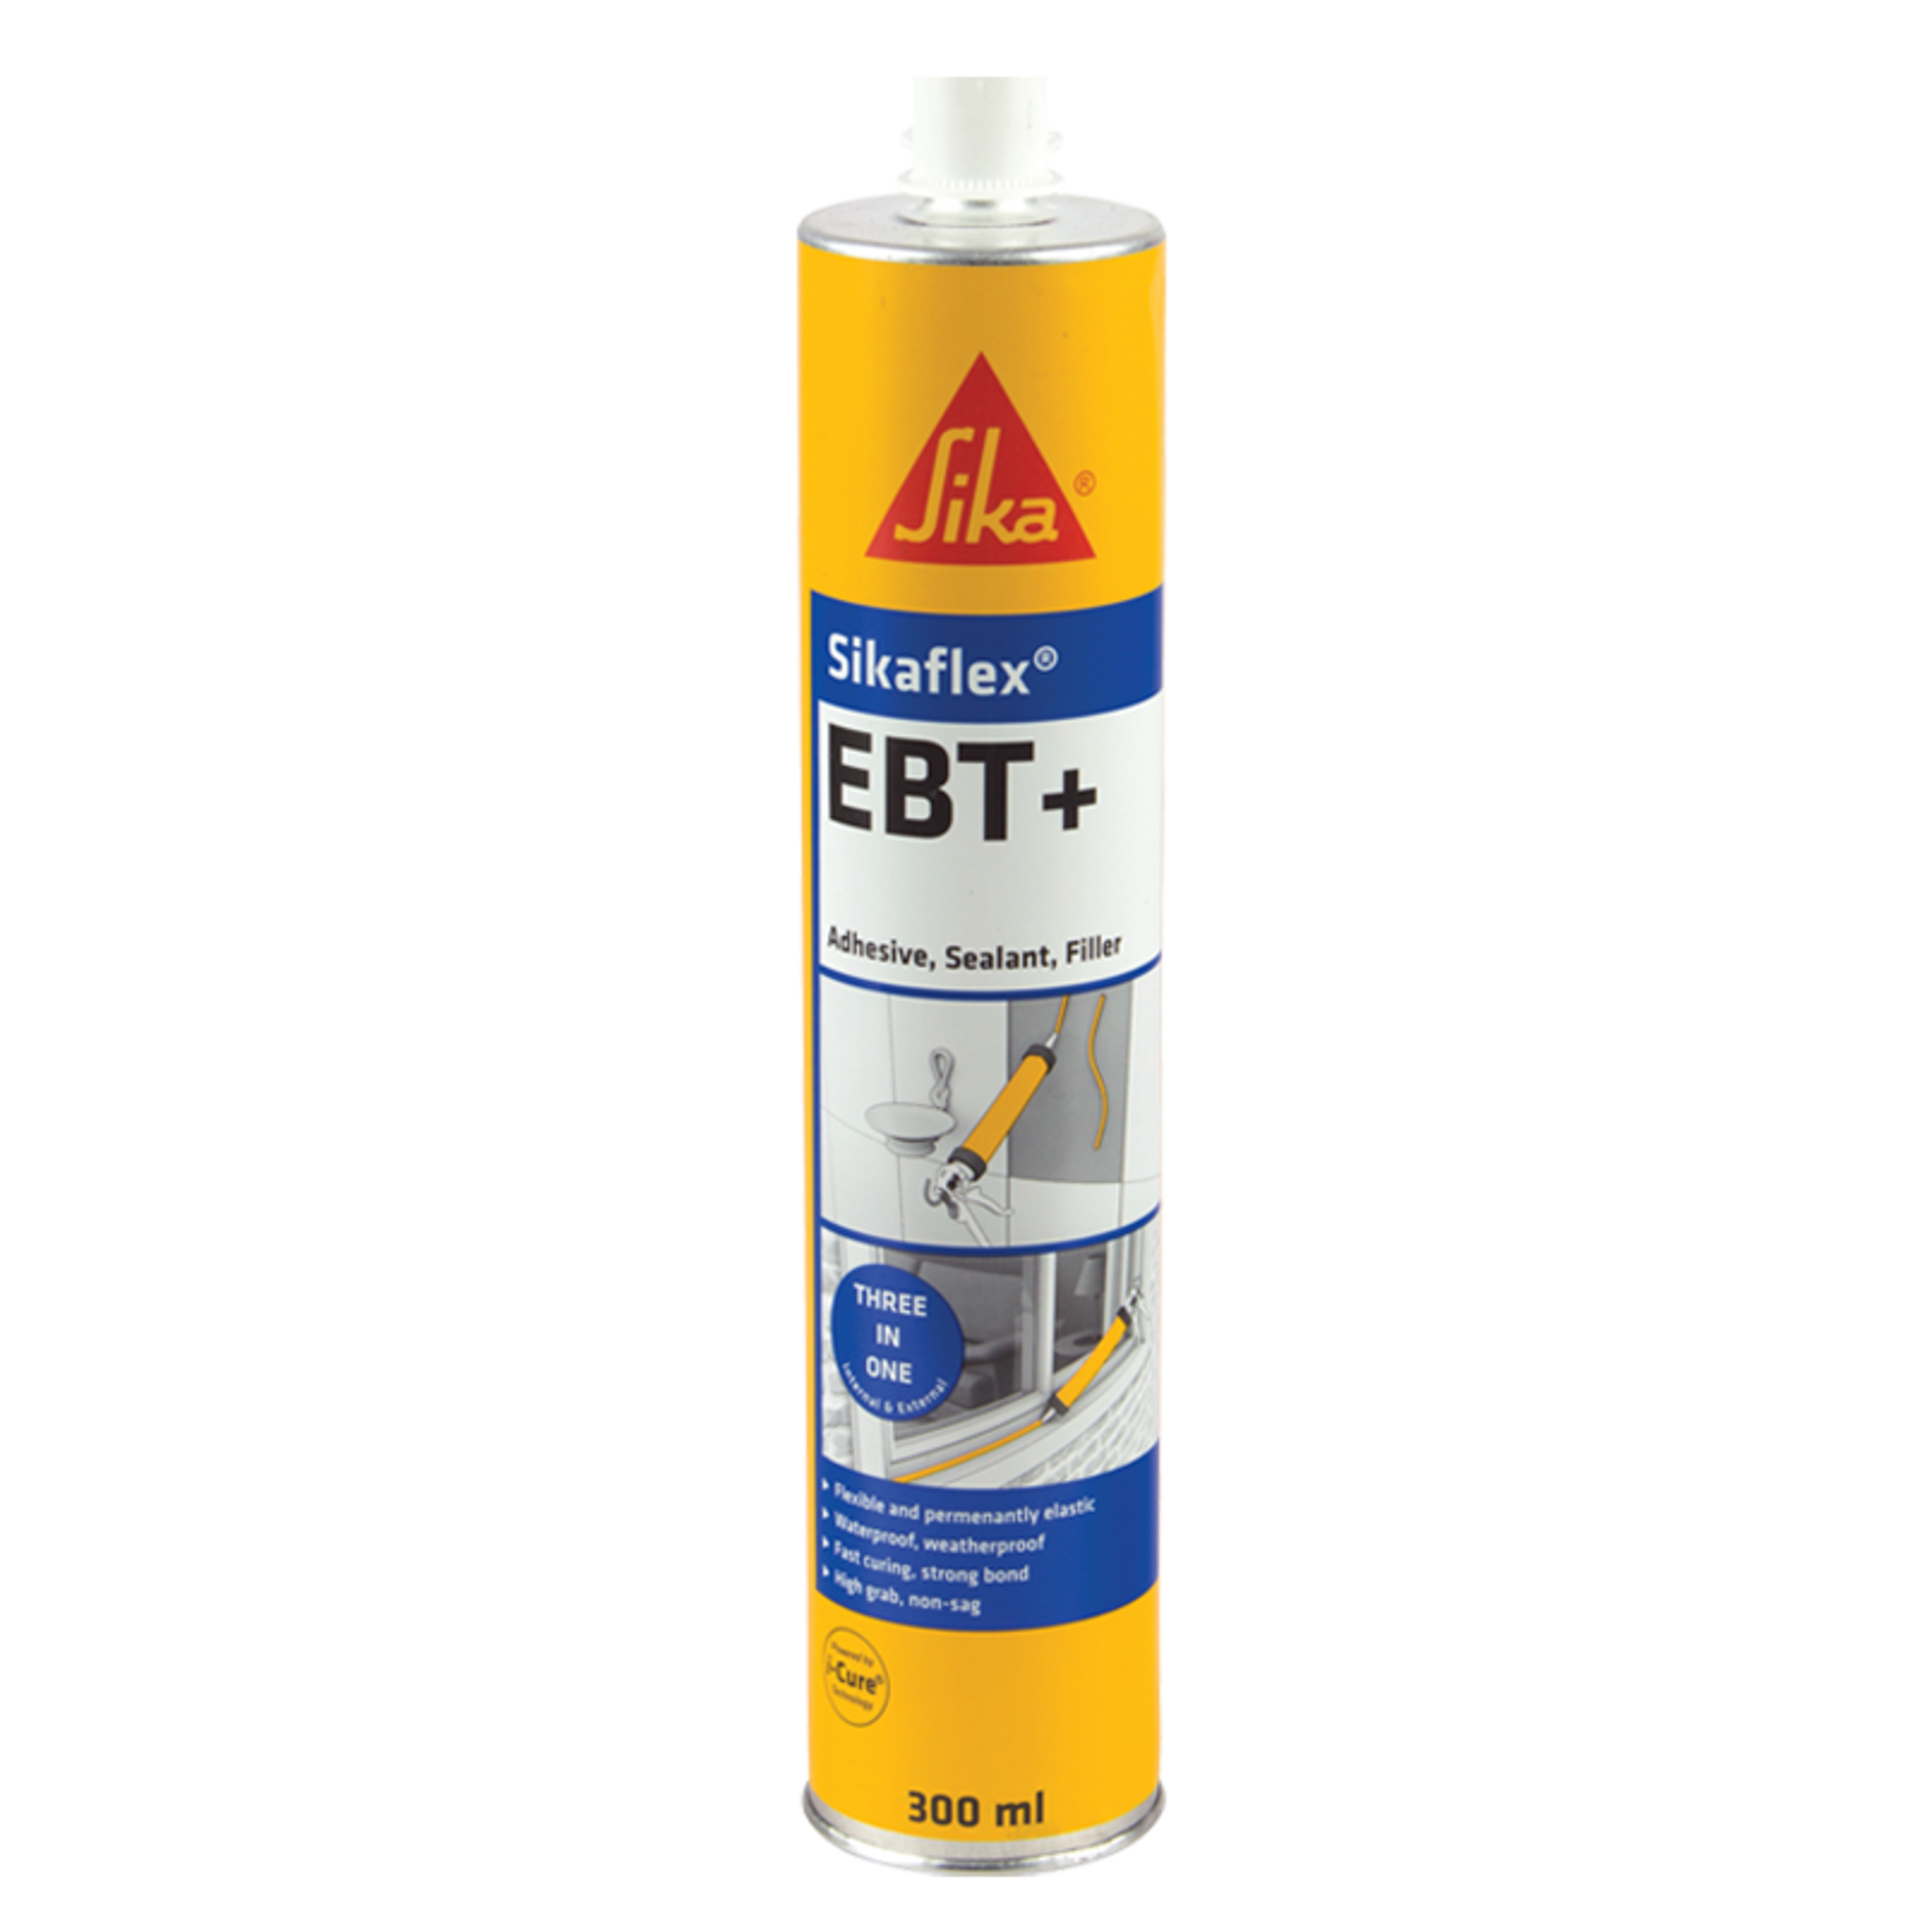 12 x Sika Ebt+ Polyurethane Adhesive & Sealant- 300Ml In Date End Oct 21